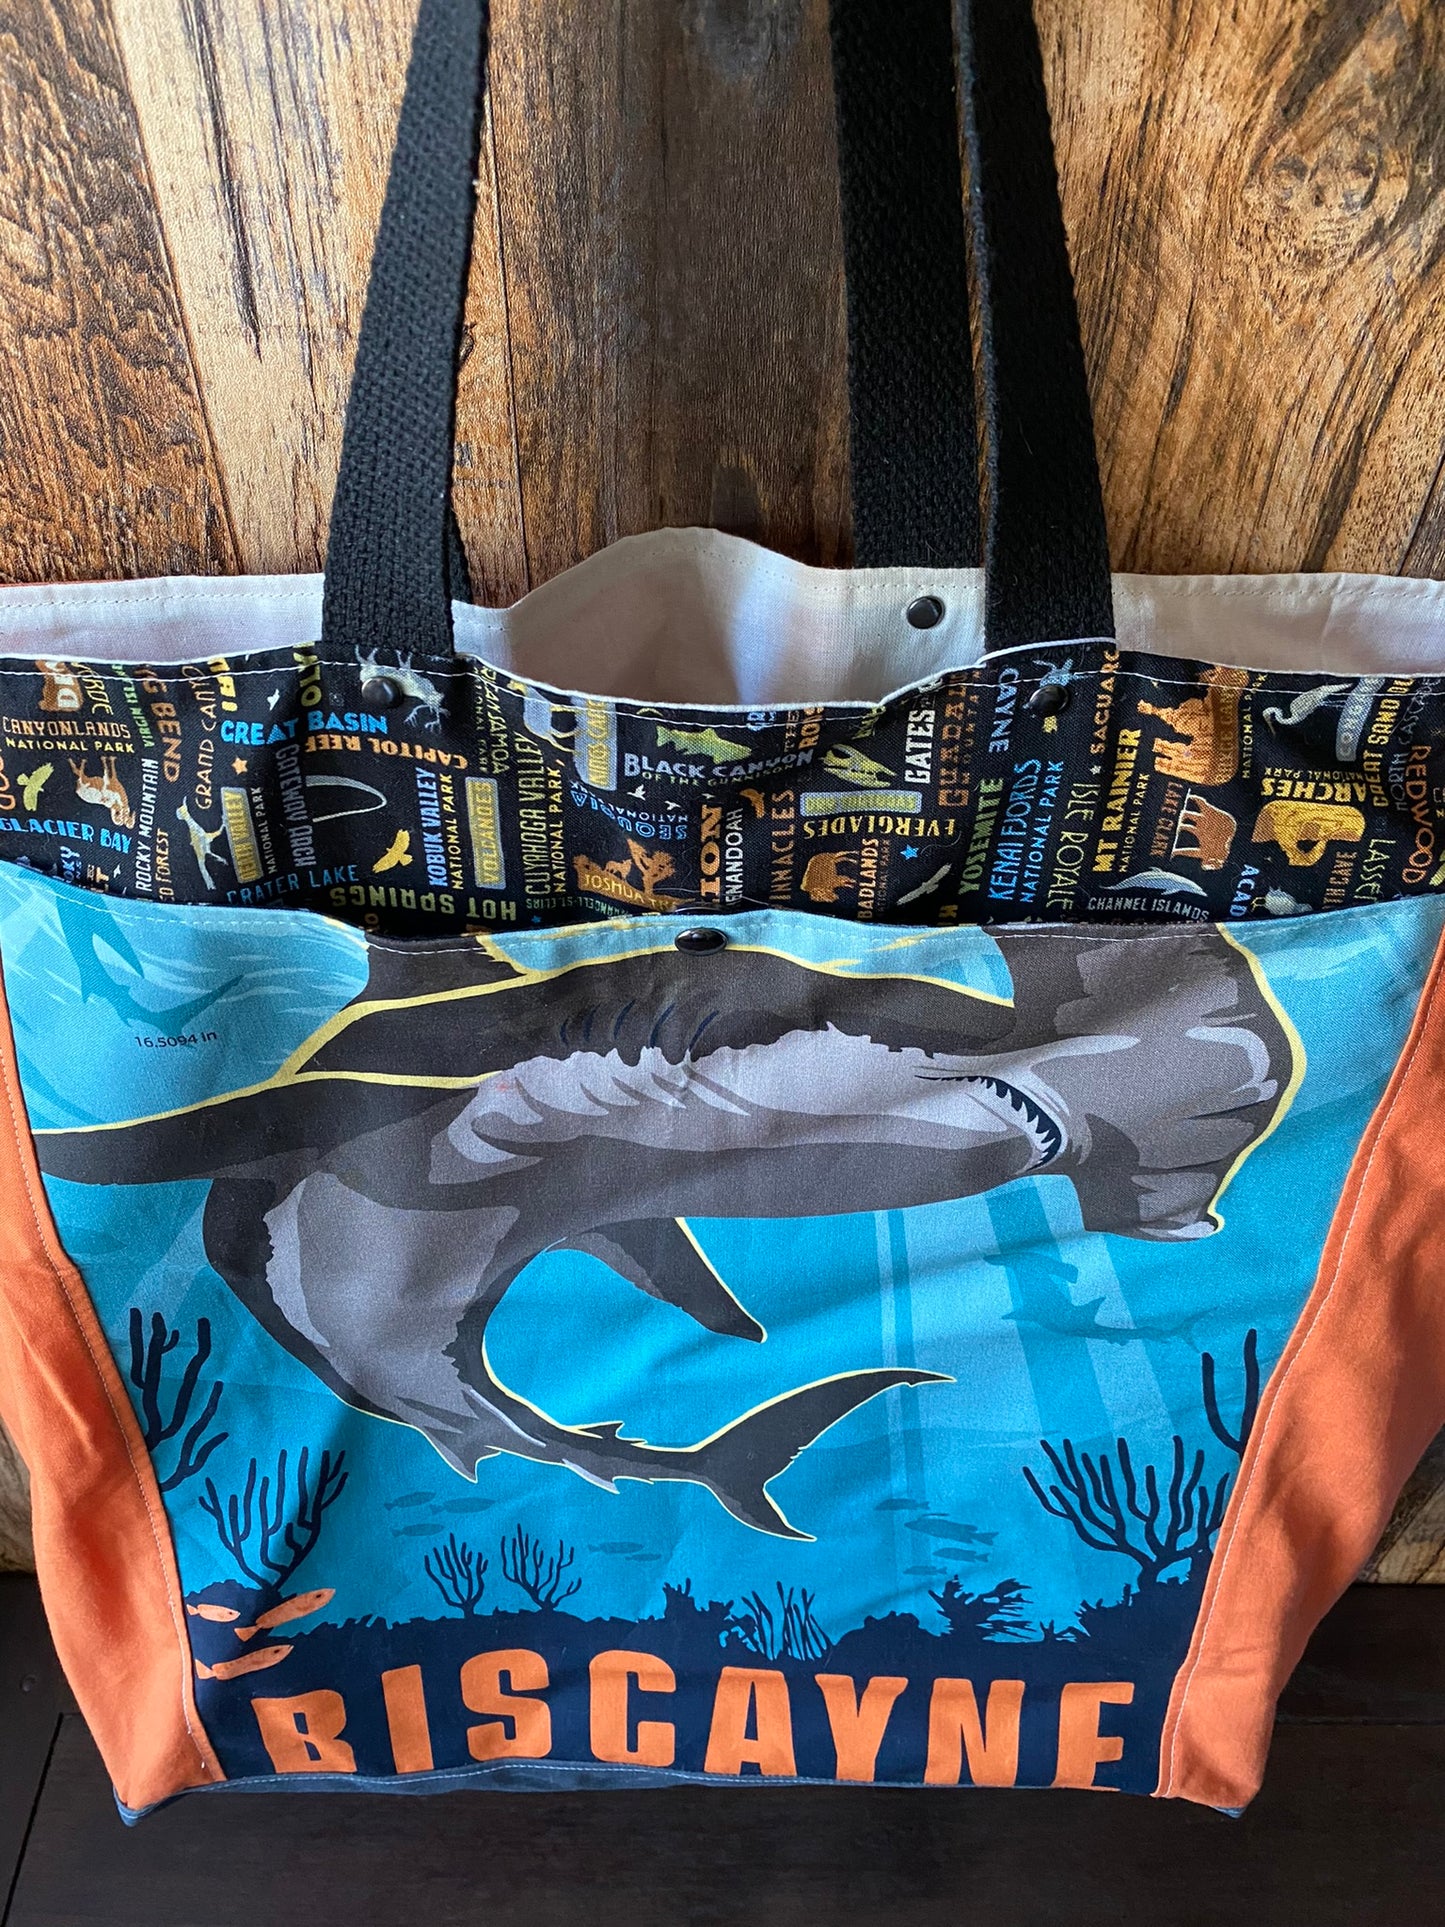 Extra Large and Lightweight Project or Festival Bag - Bay of Biscayne